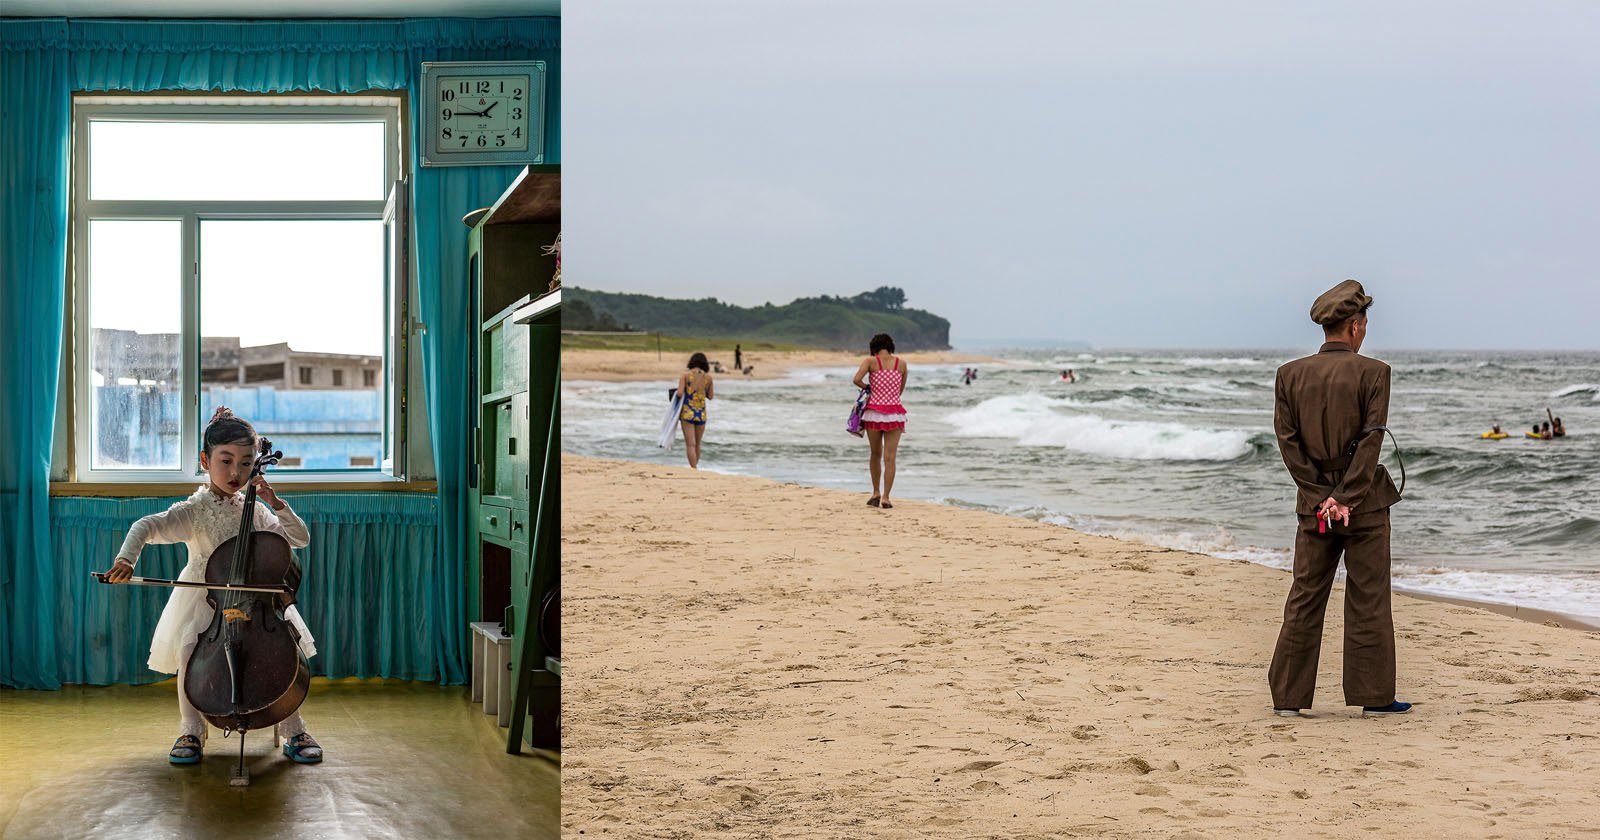 A split image: on the left, a young girl plays the cello in a blue room with a clock showing 10:10 AM; on the right, a man in a uniform stands on a beach with hands clasped behind his back, as people swim and walk along the shoreline.